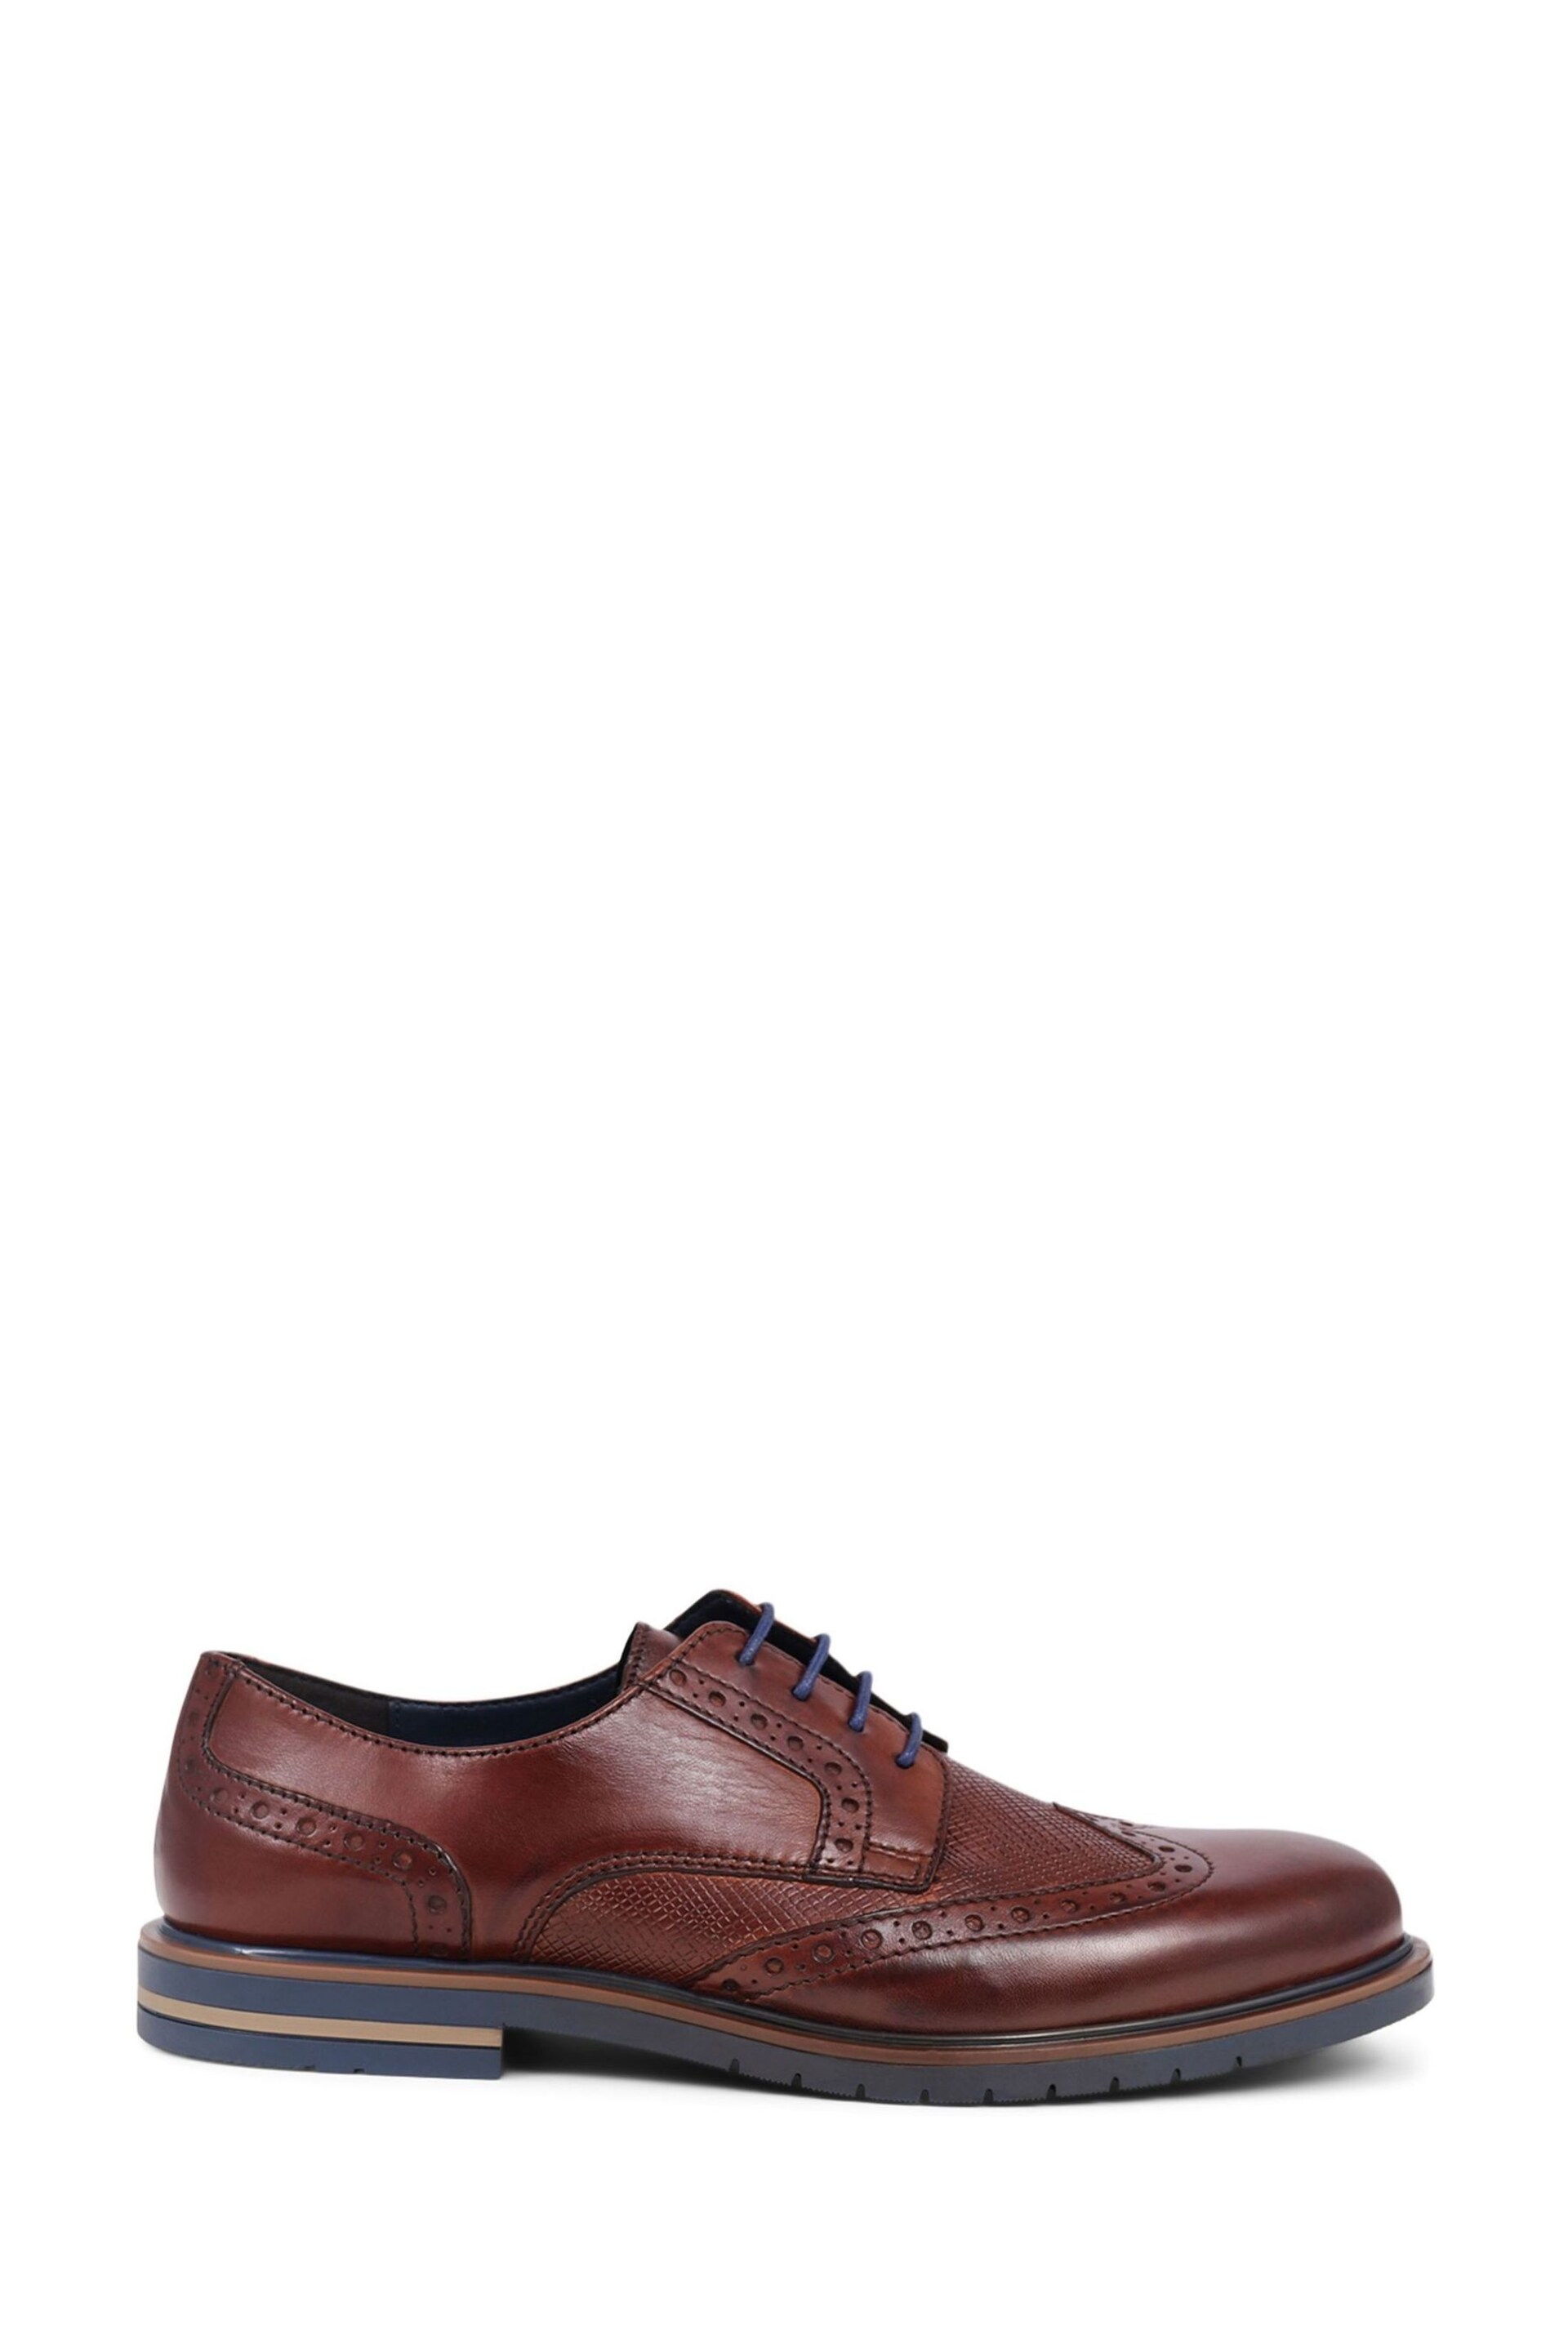 Pavers Brogues Detailed Leather Lace-Up Brown Shoes - Image 2 of 5